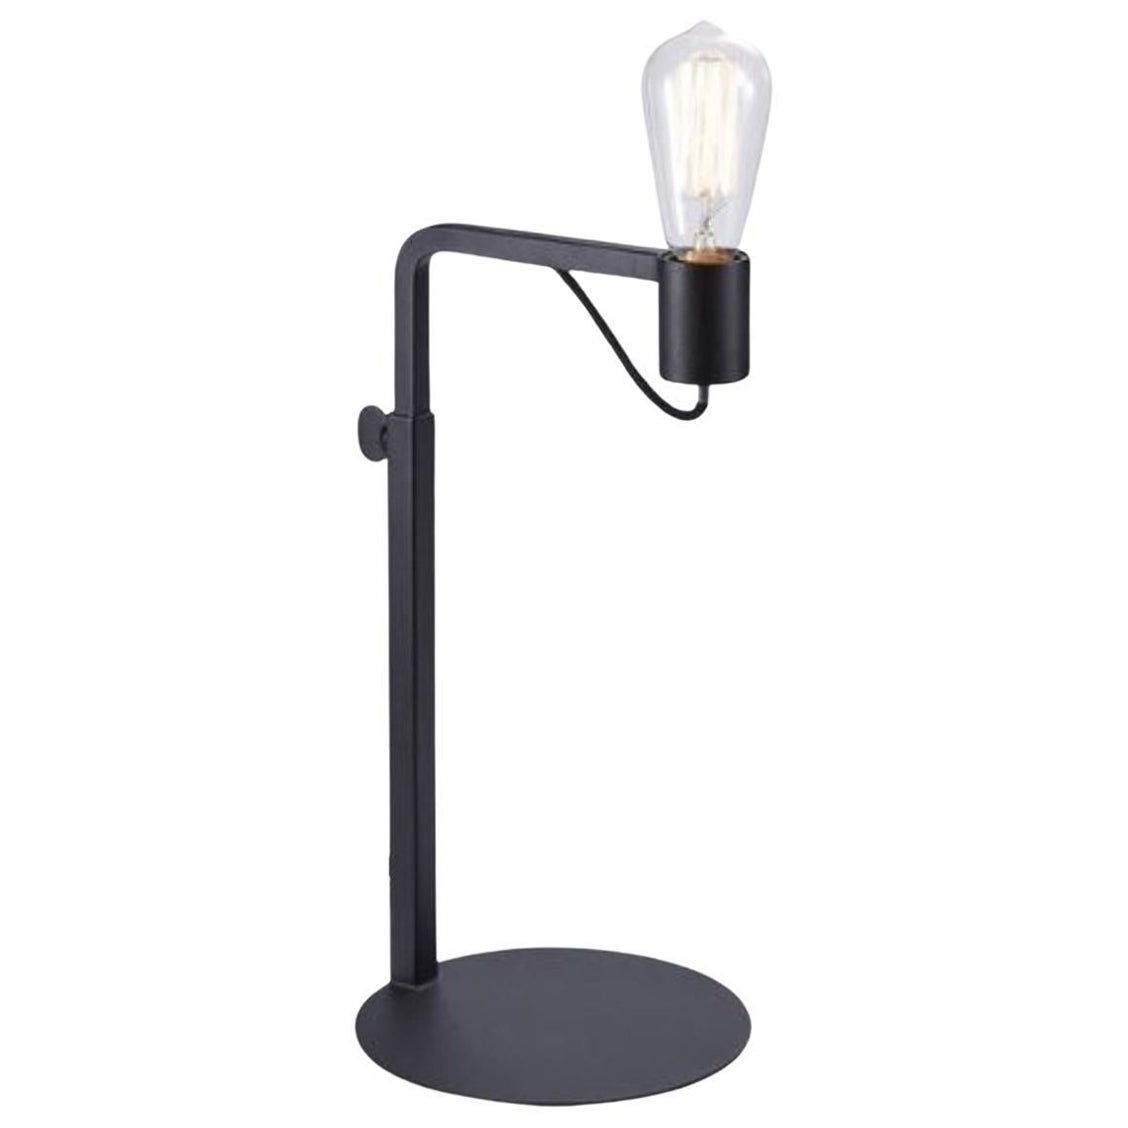 Grafit Table Lamp by Radar For Sale